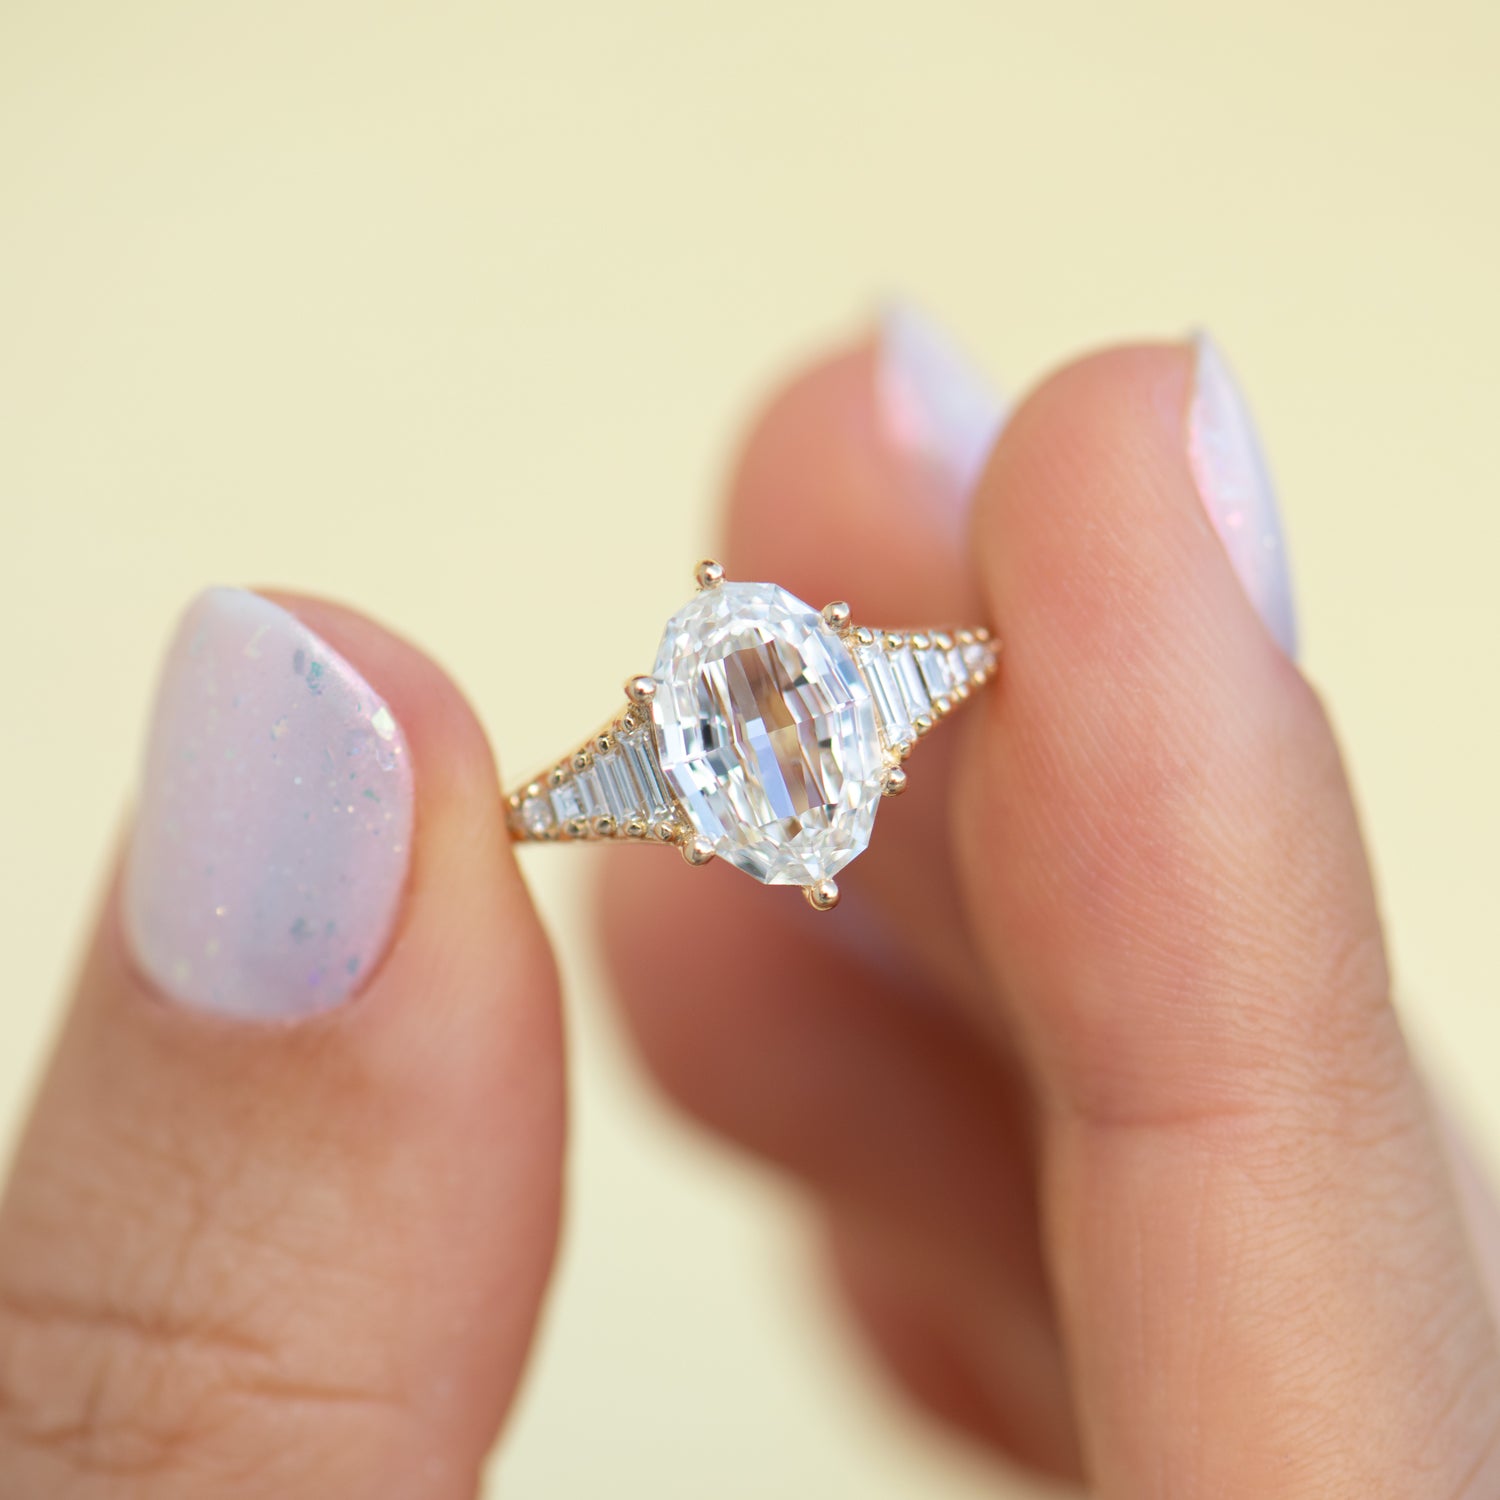 11 Steps To Crafting A Diamond Ring